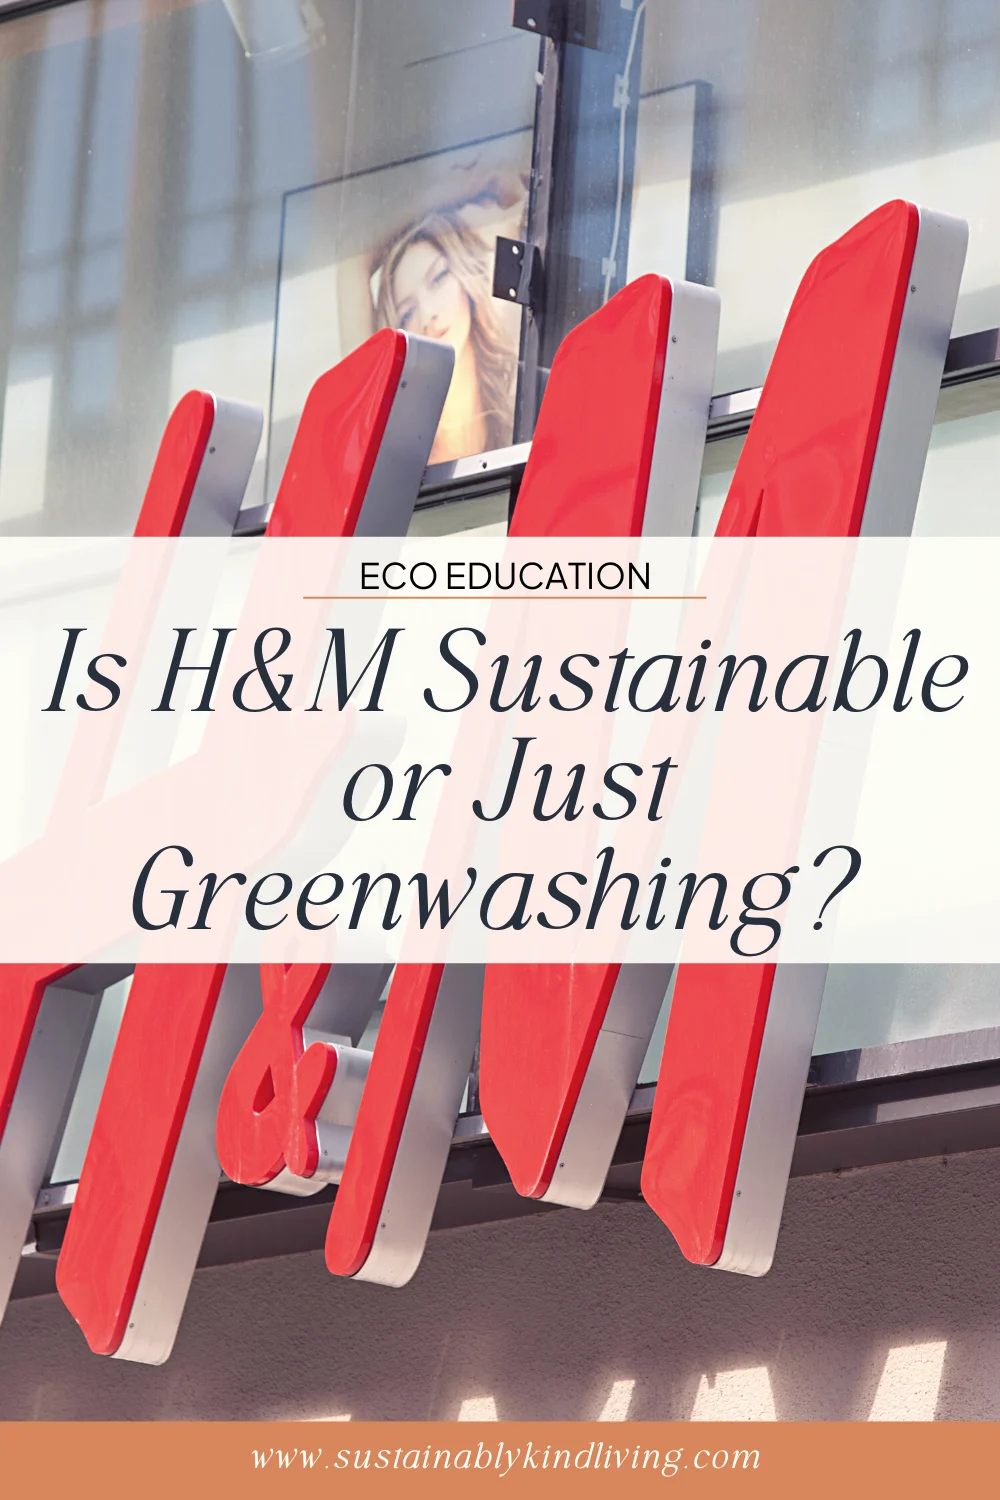 h&m sustainability report